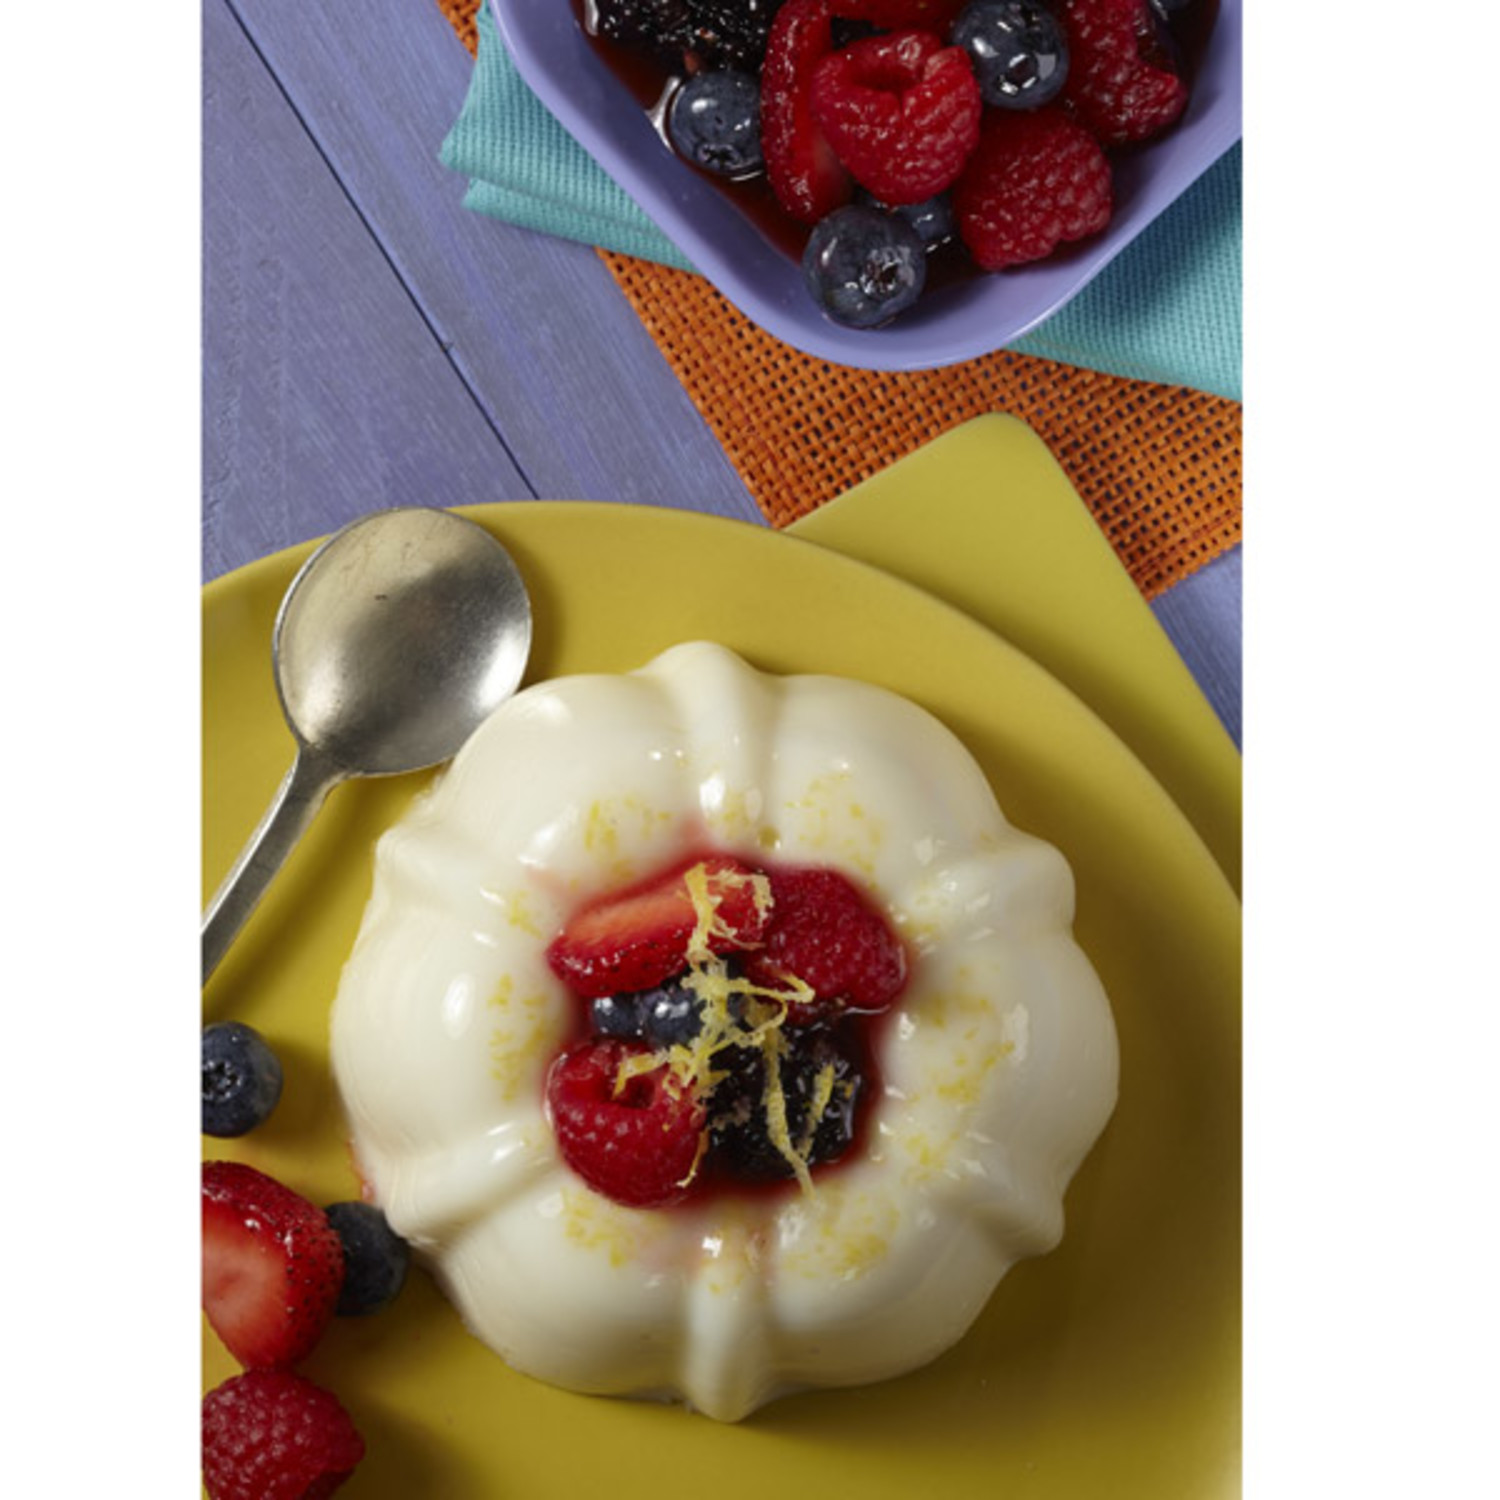 Lemon Panna Cotta with Macerated Berries